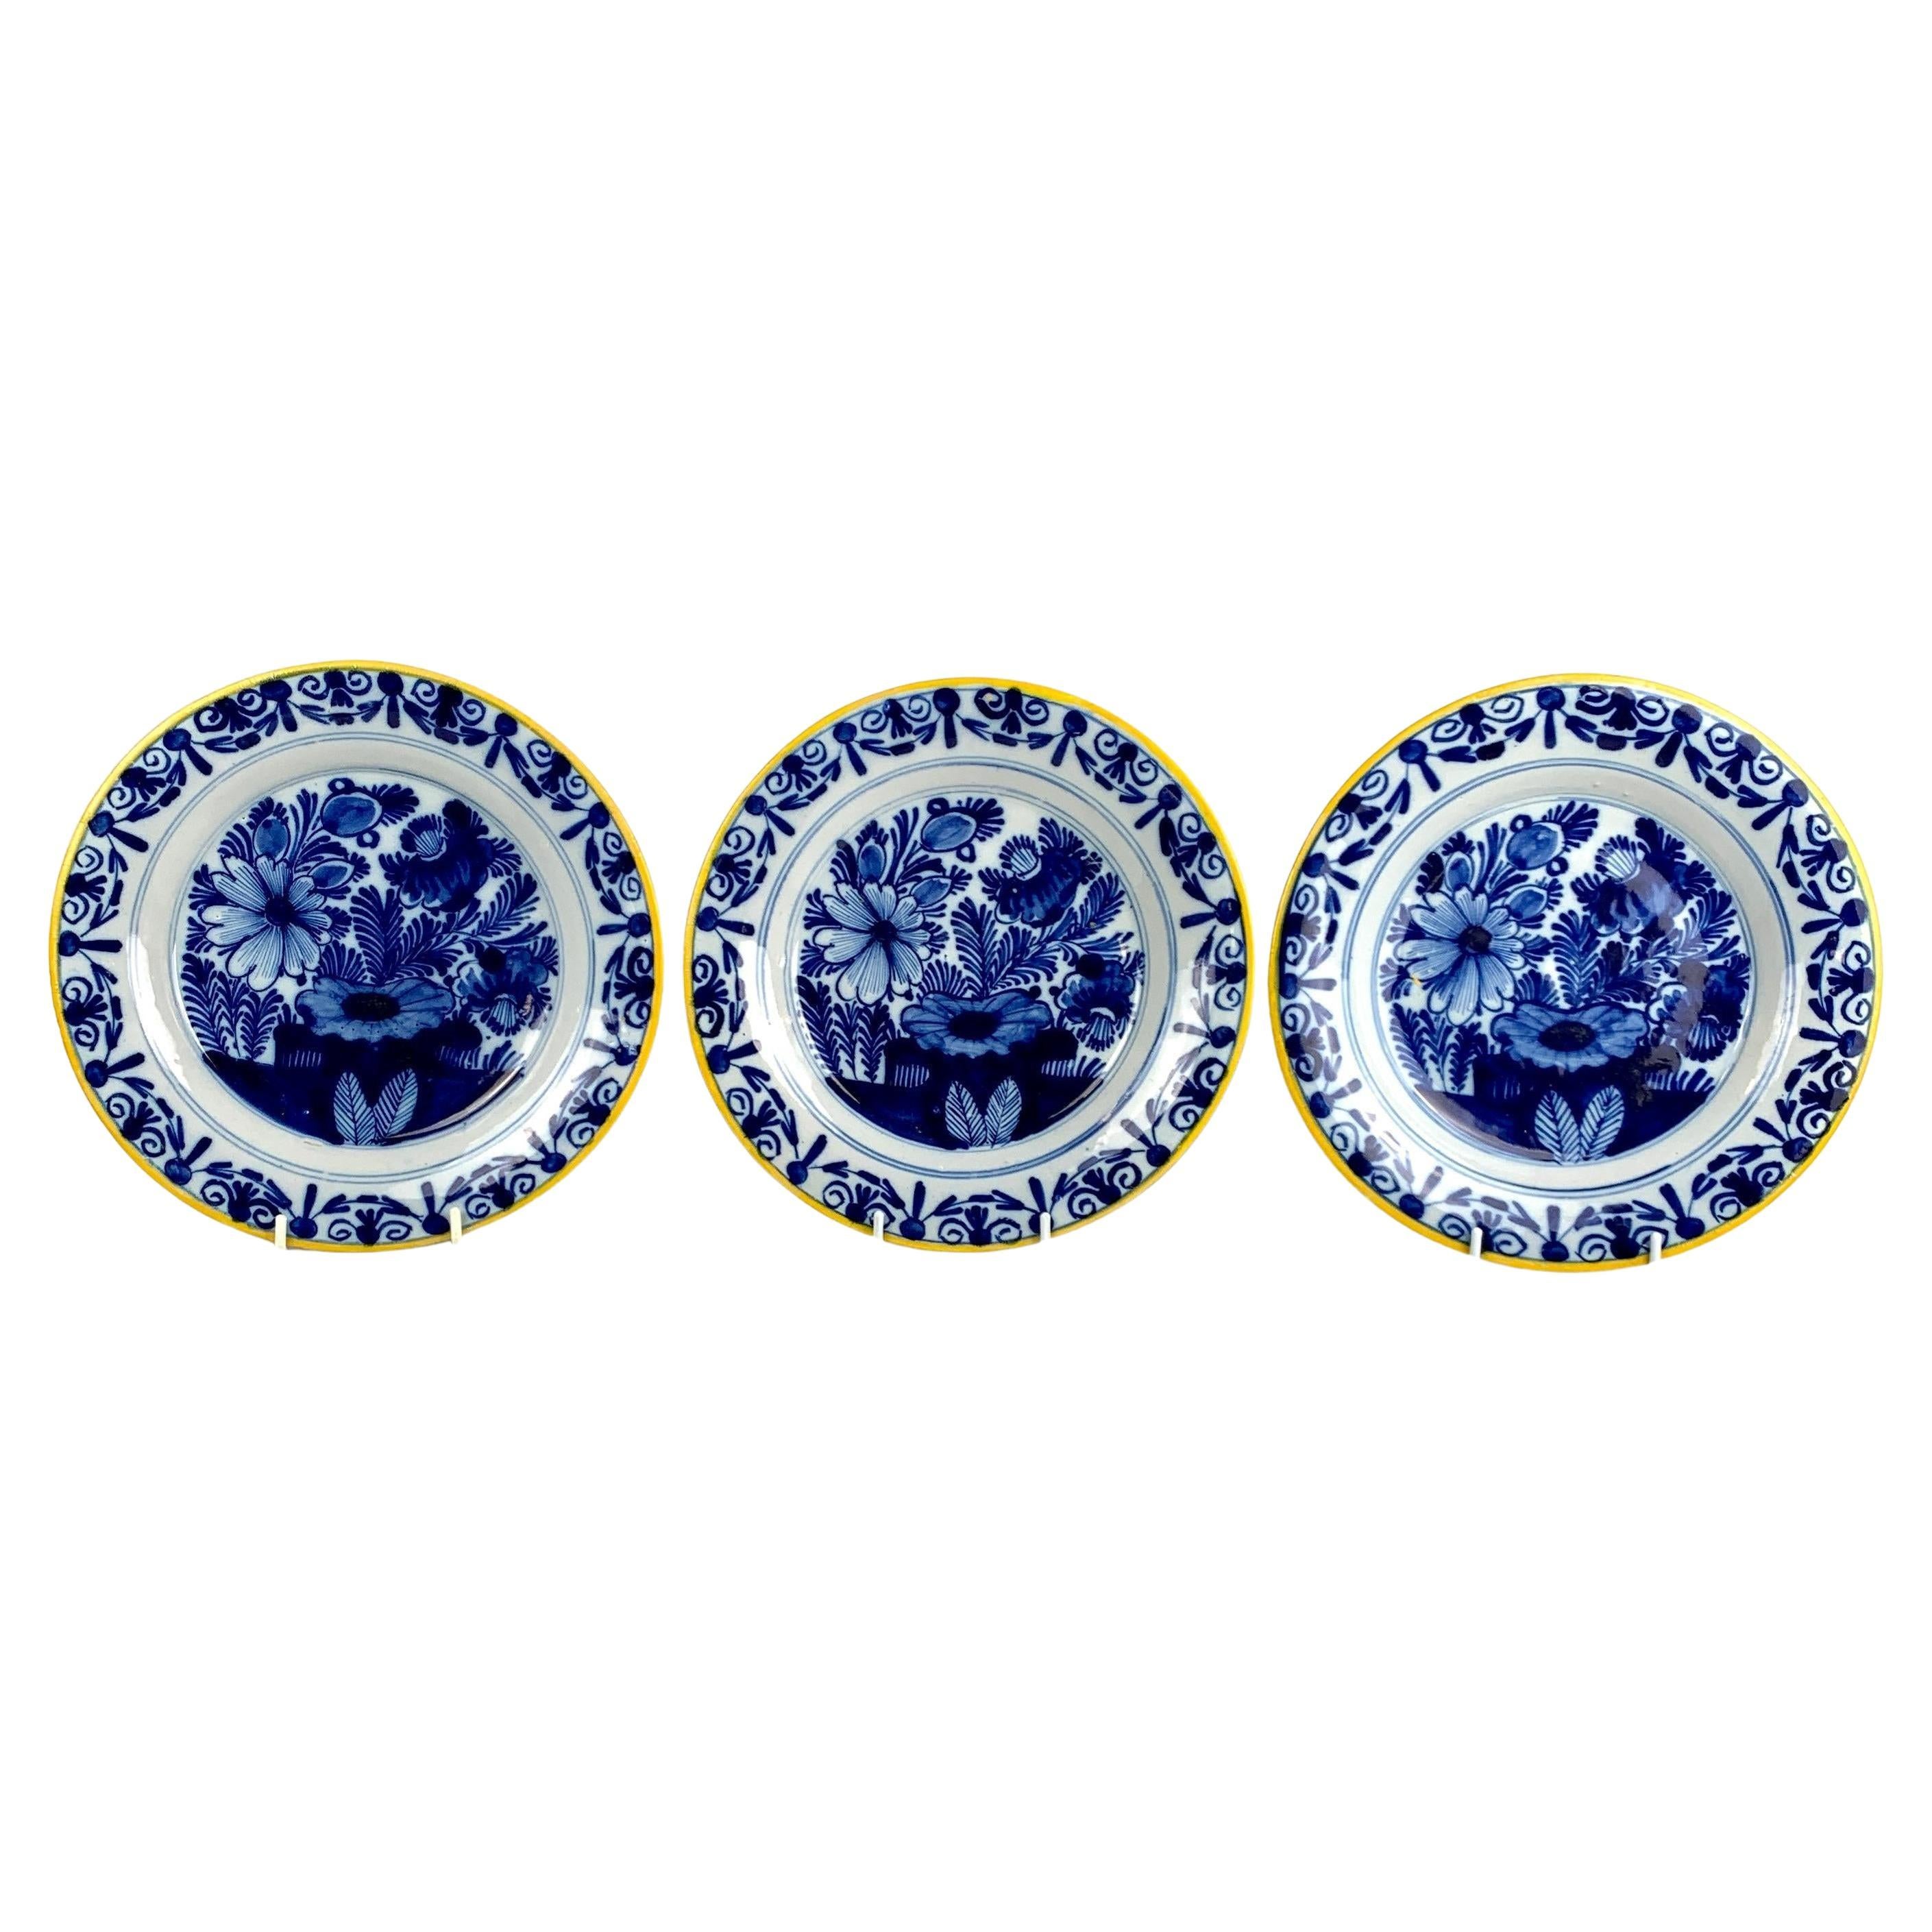 Three Blue and White Delft Plates Hand Painted 18th Century Netherlands